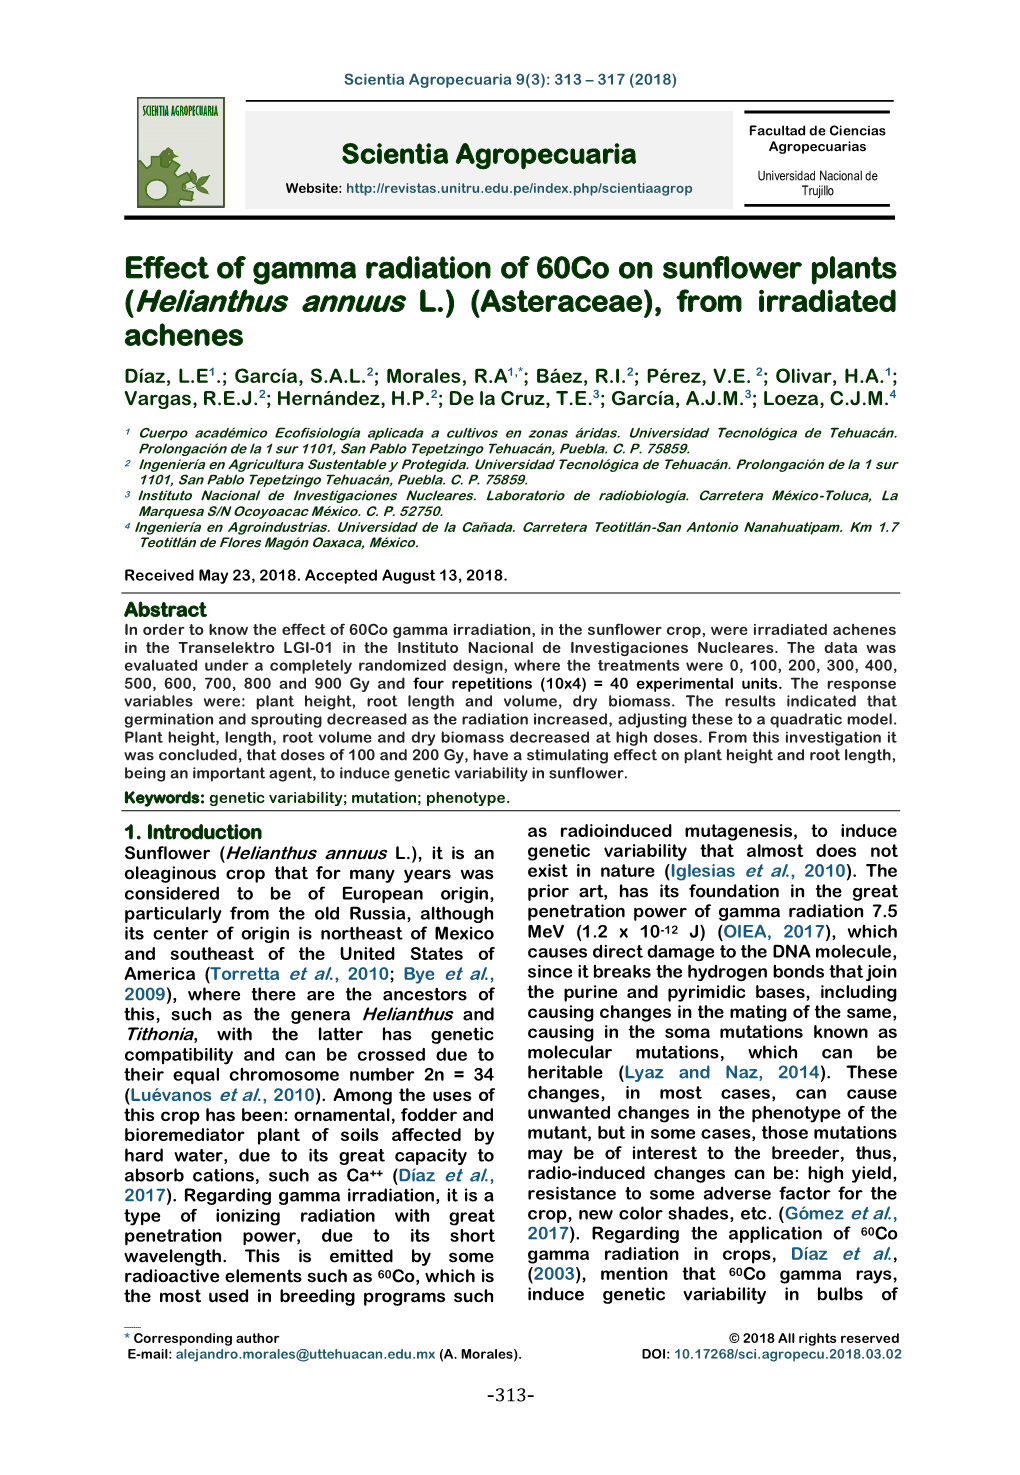 Effect of Gamma Radiation of 60Co on Sunflower Plants (Helianthus Annuus L.) (Asteraceae), from Irradiated Achenes